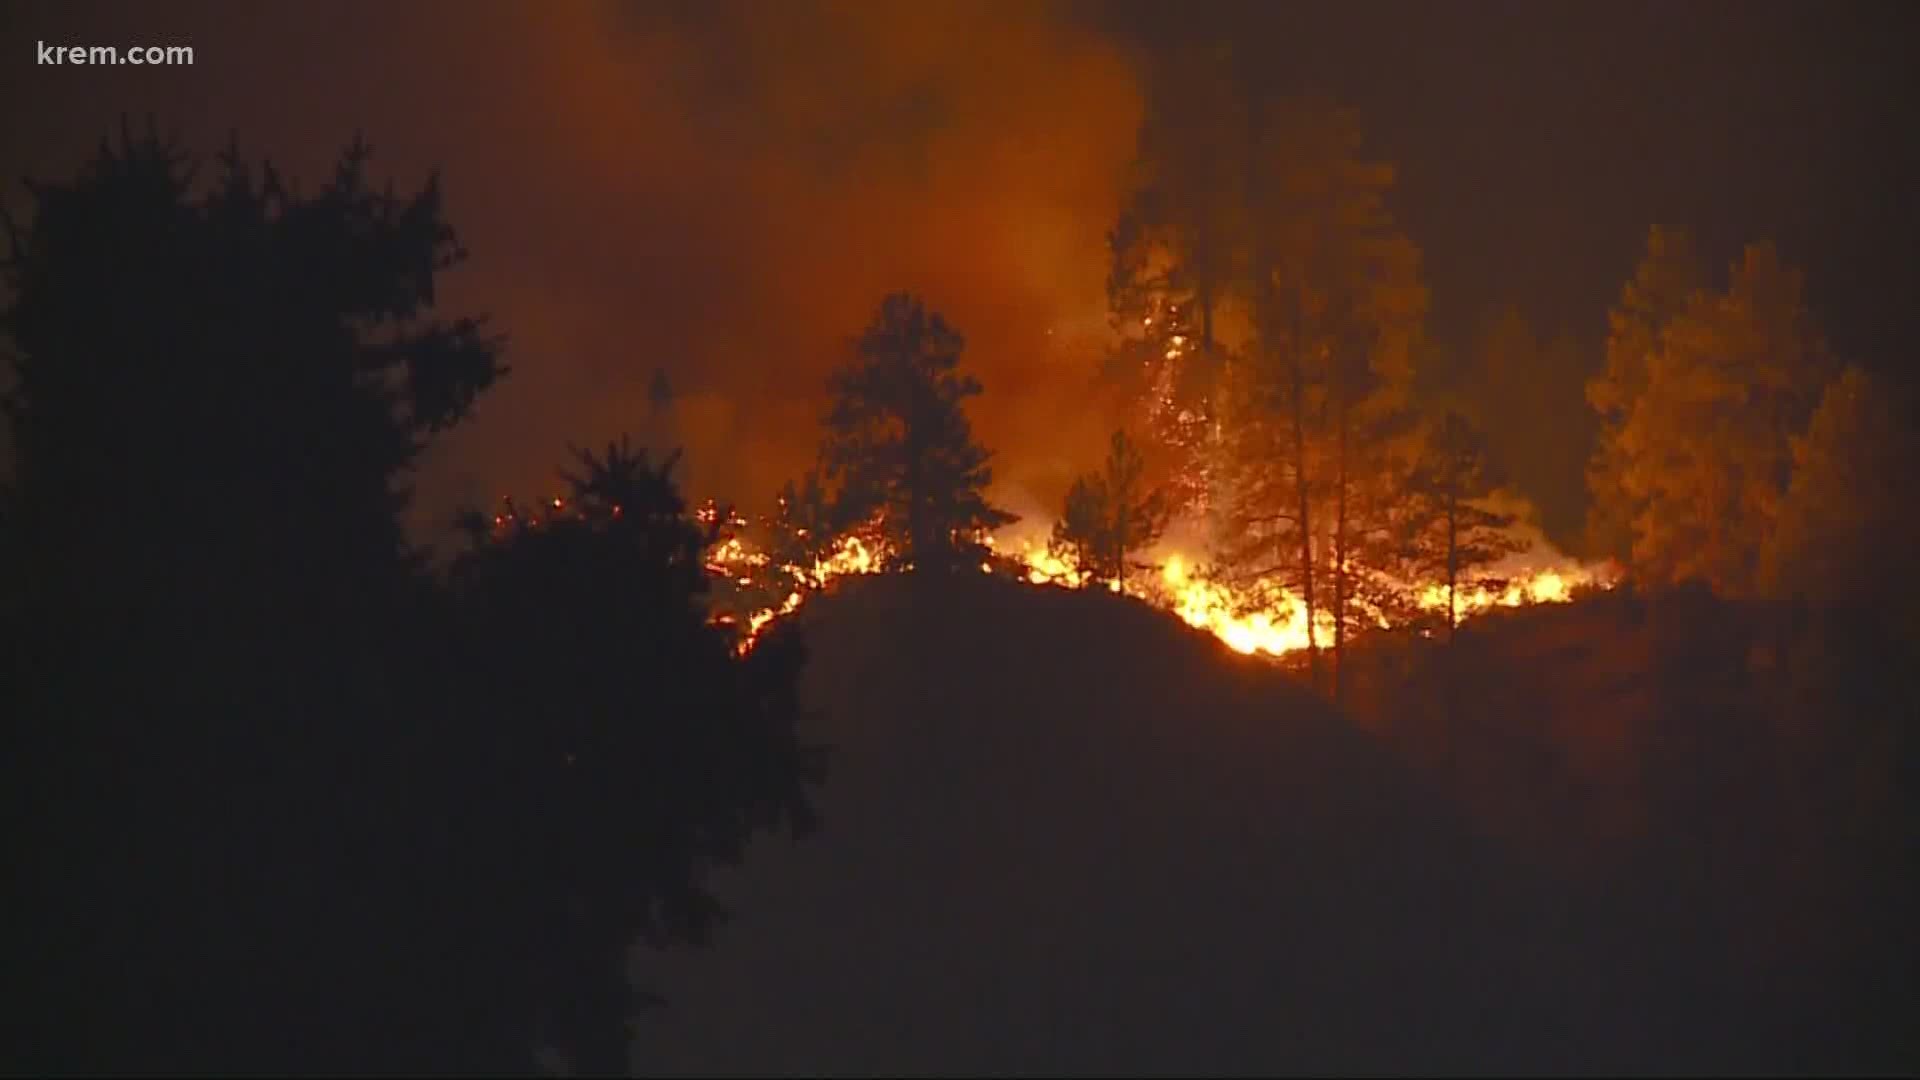 A bill to spend $125 million to prevent and fight wildfires in Washington state was passed by the House and now will go to Gov. Jay Inslee for his signature.